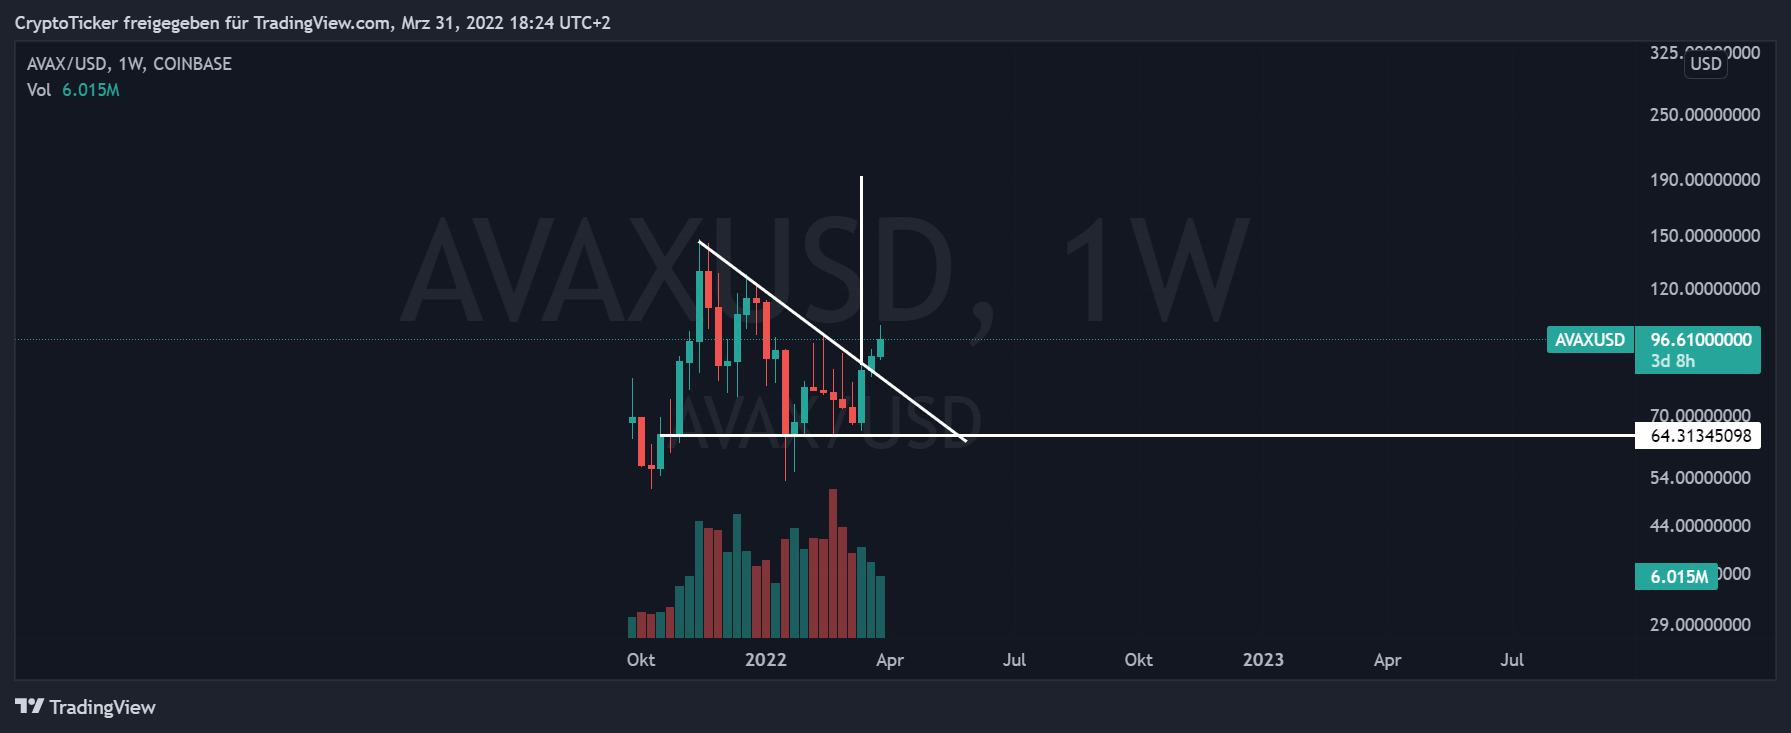 AVAX/USD 1-week chart showing the break of the descending triangle